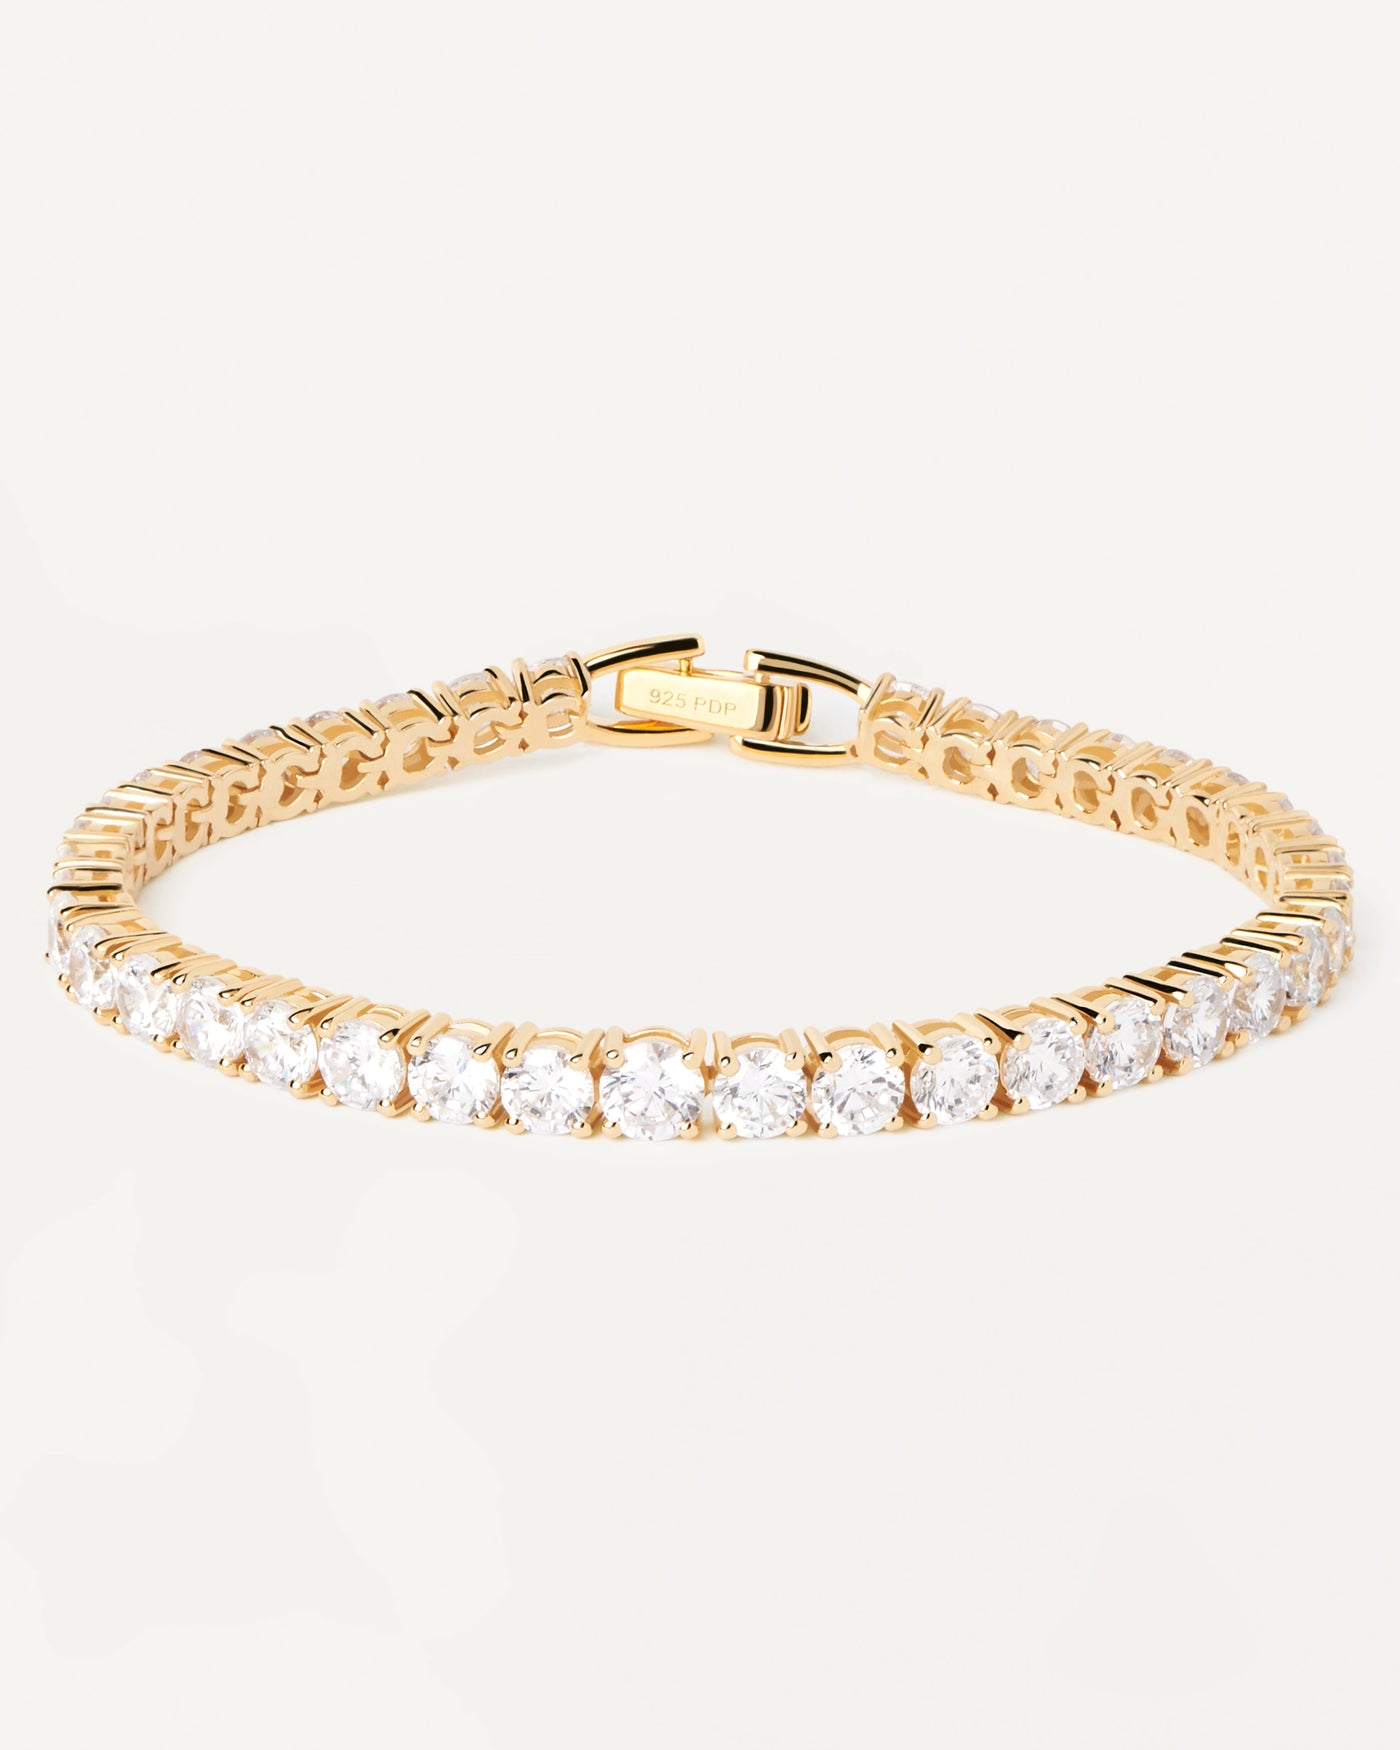 2023 Selection | Tennis Supreme Bracelet. Gold-plated silver chain bracelet with tennis link and white zirconia. Get the latest arrival from PDPAOLA. Place your order safely and get this Best Seller. Free Shipping.